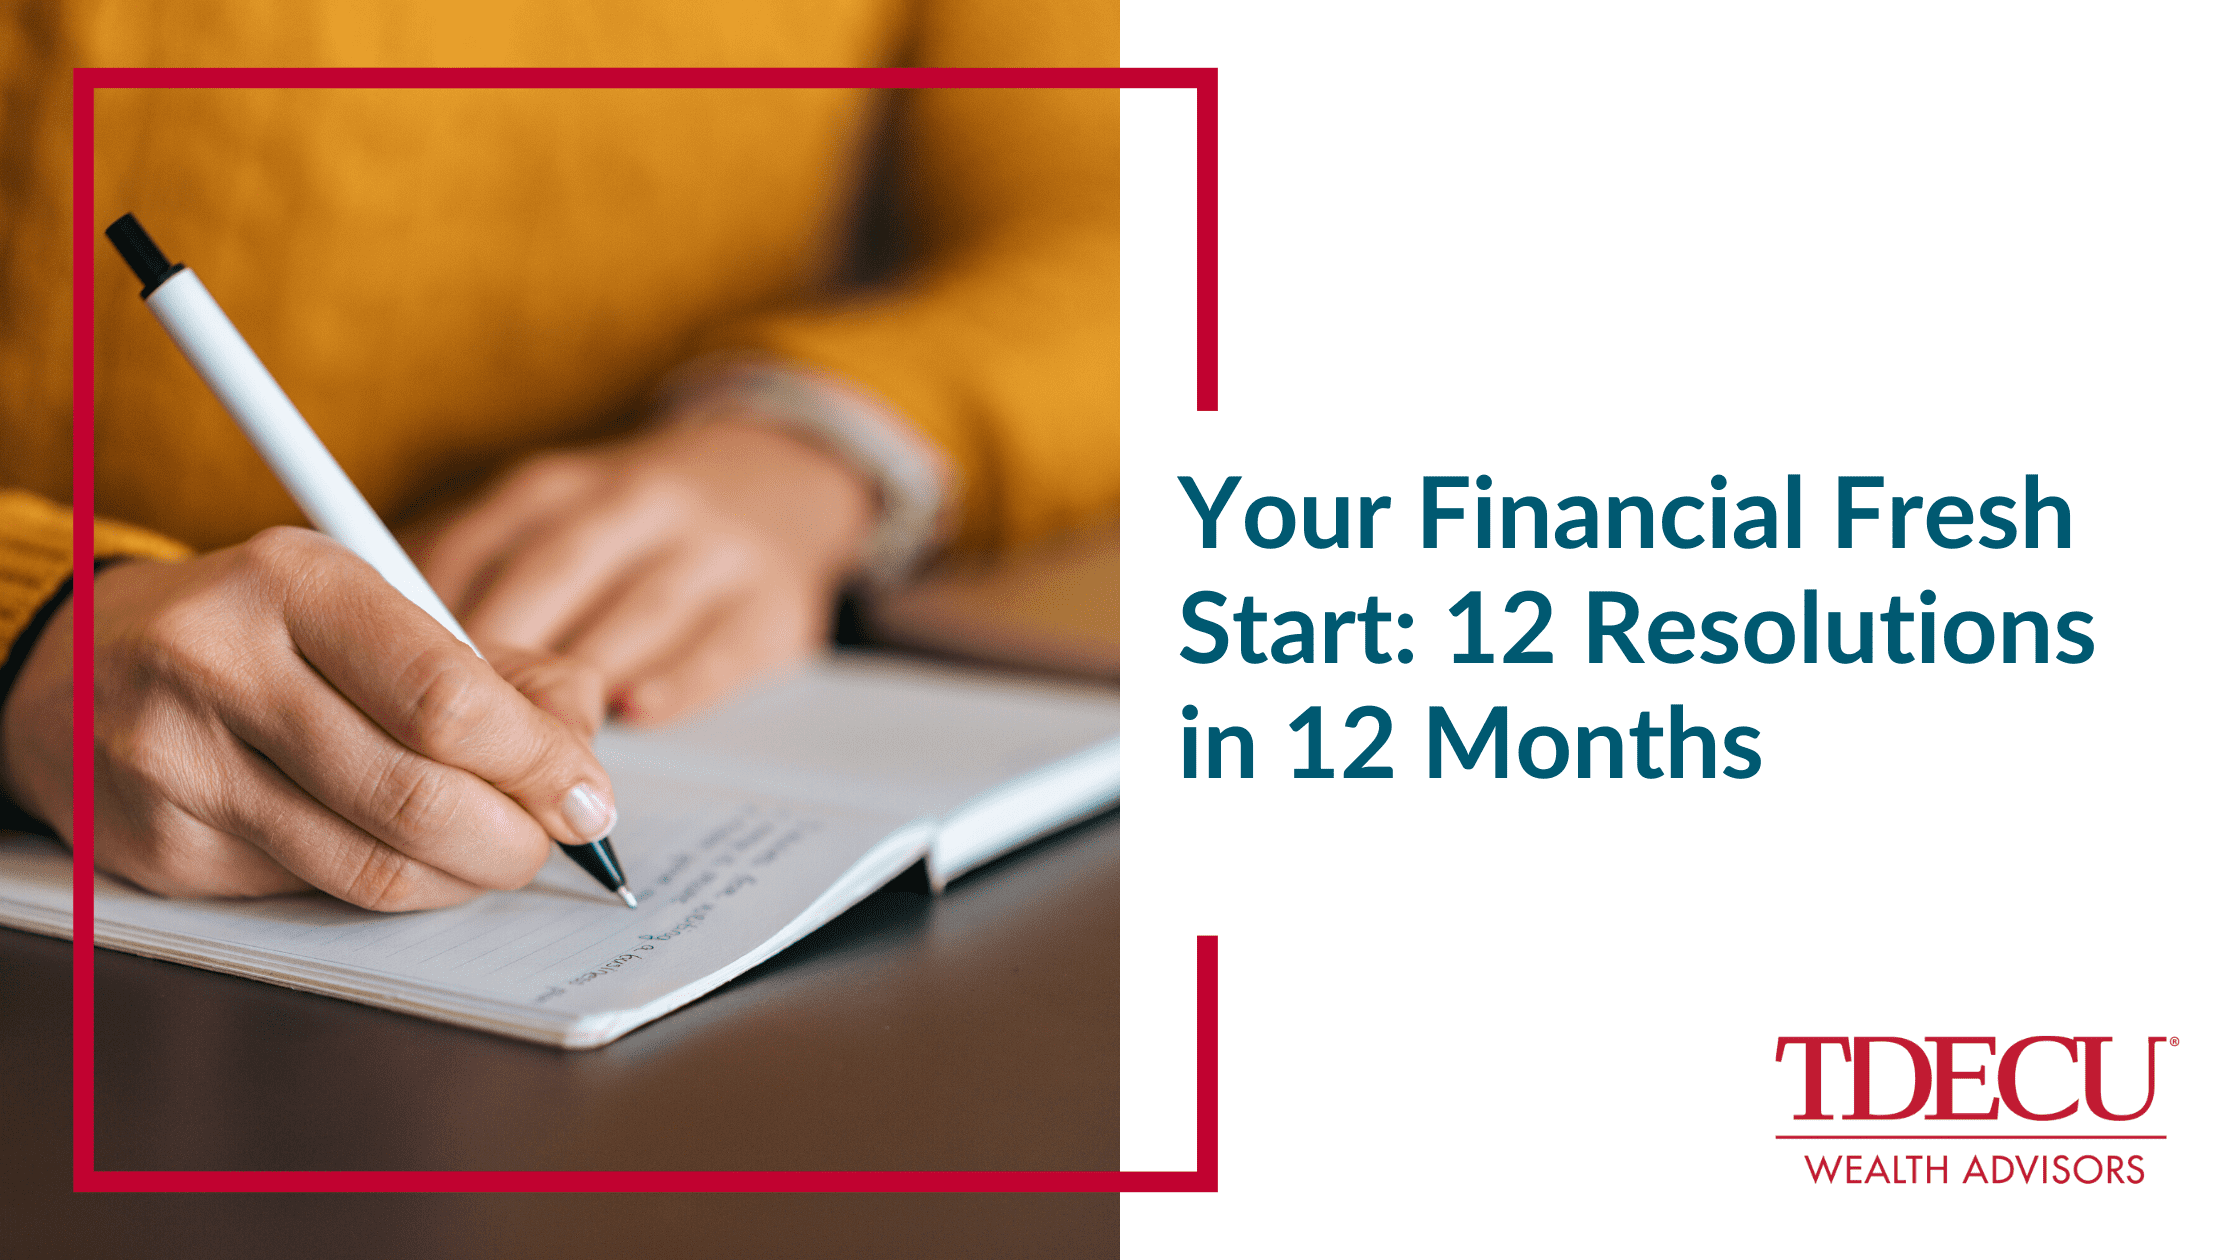 Your Financial Fresh Start: 12 Resolutions in 12 Months